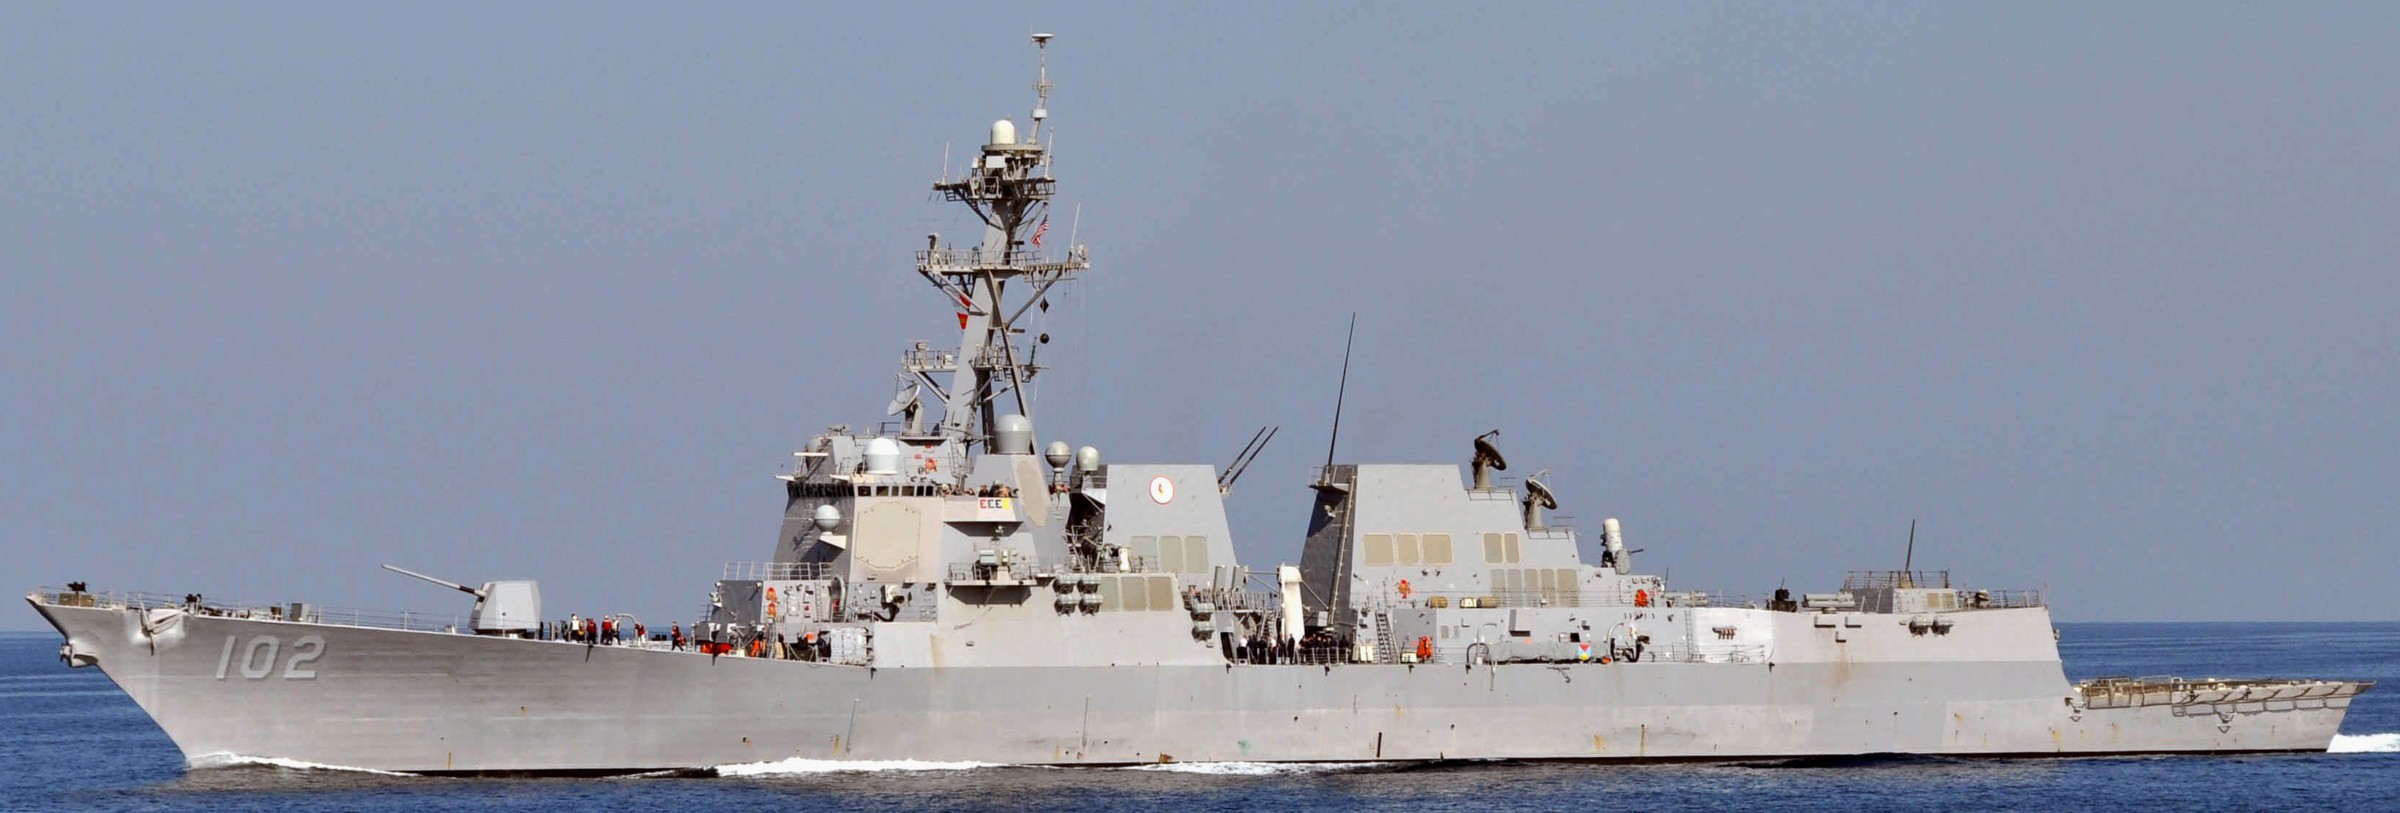 ddg-102 uss sampson guided missile destroyer 2009 44 gulf of oman